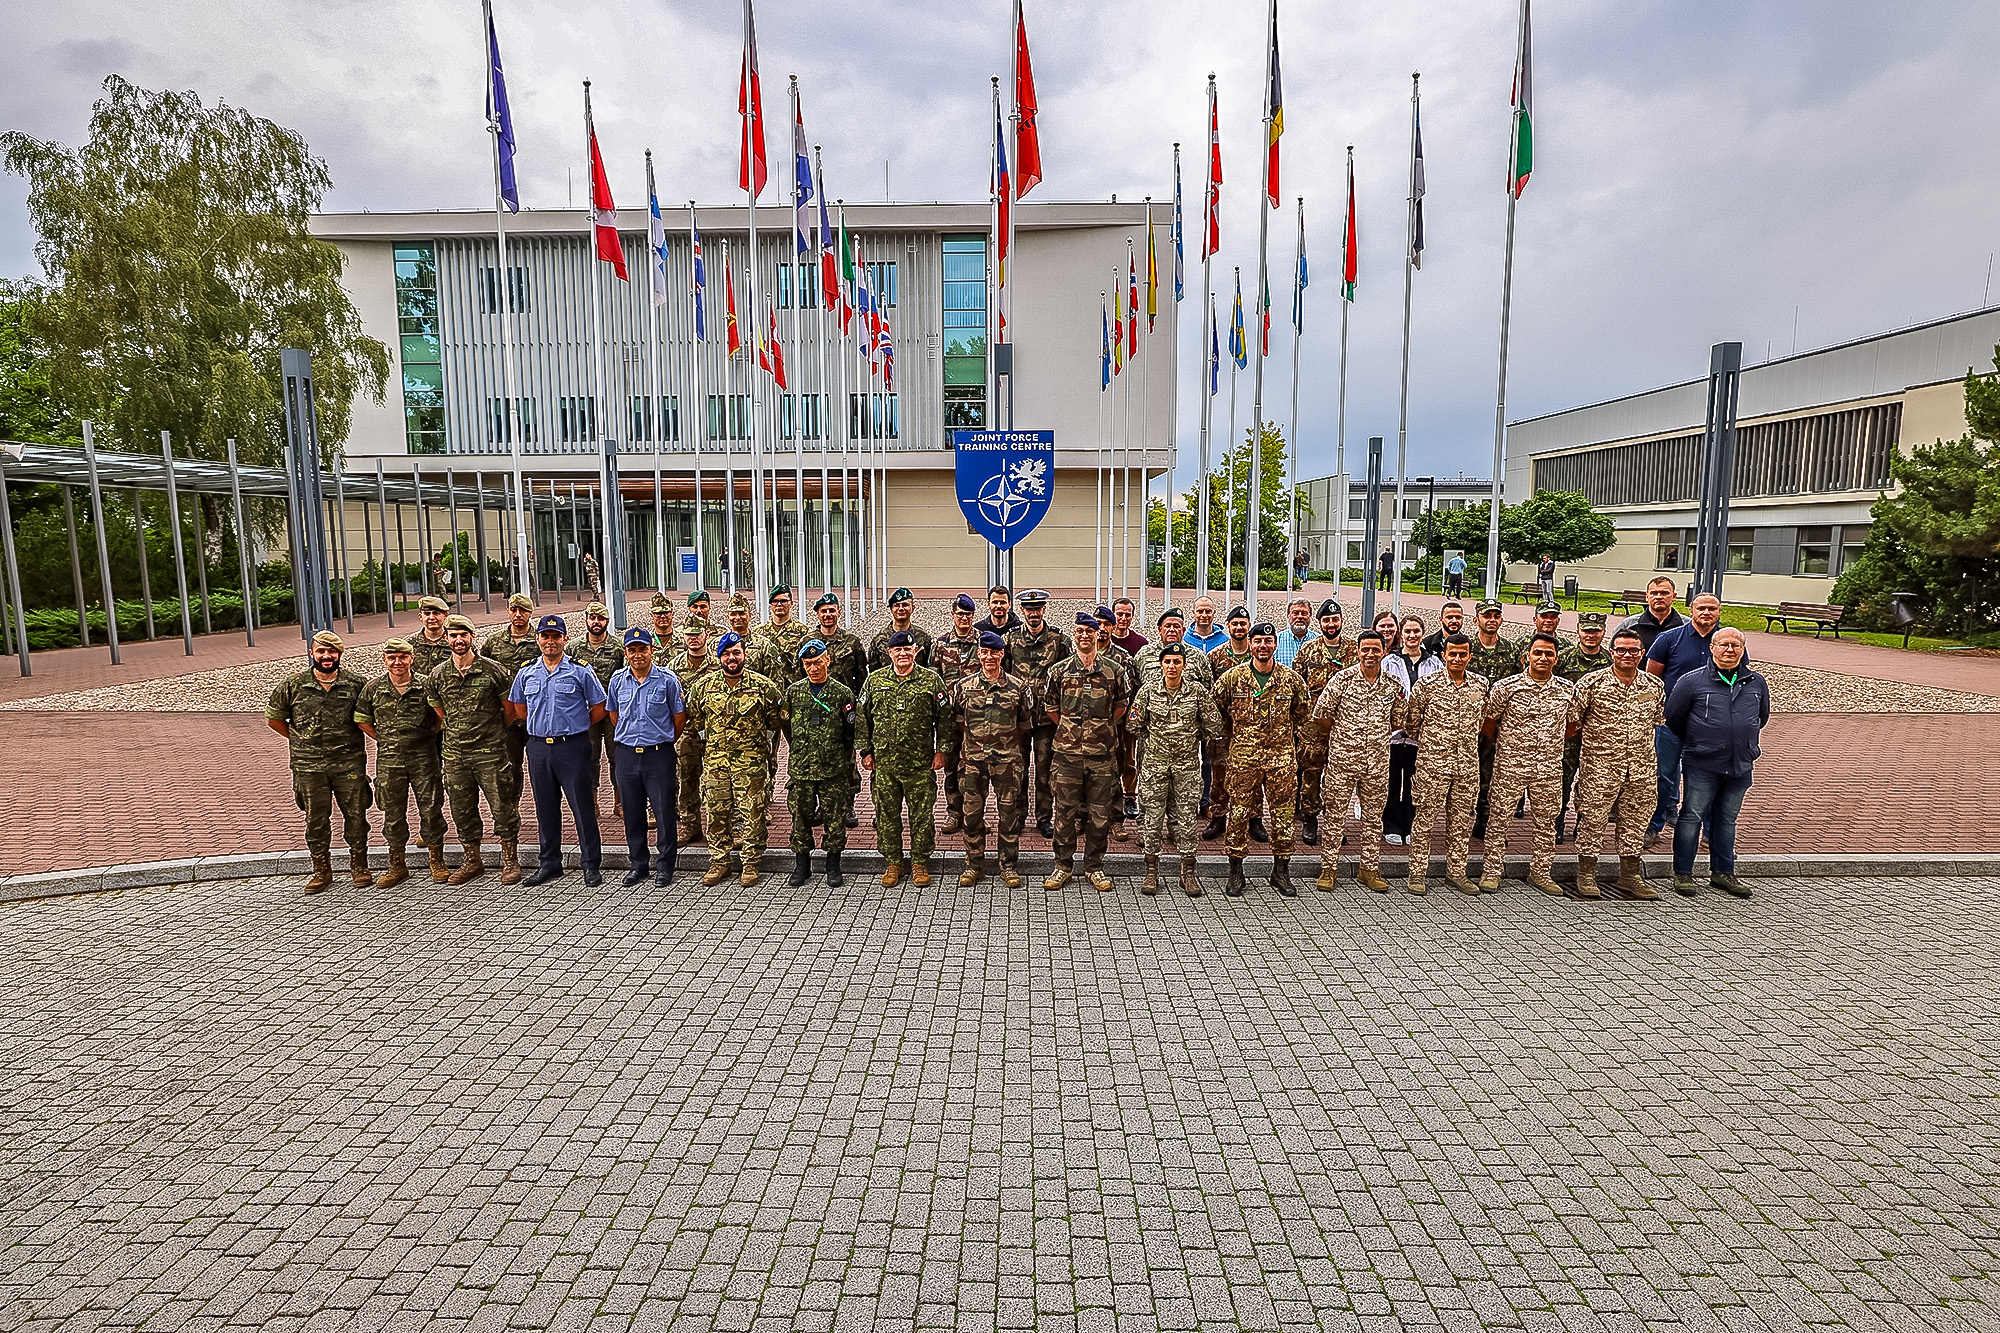 CR14 and NATO participants at NATO Joint Force Training Centre in Bydgoszcz, Poland